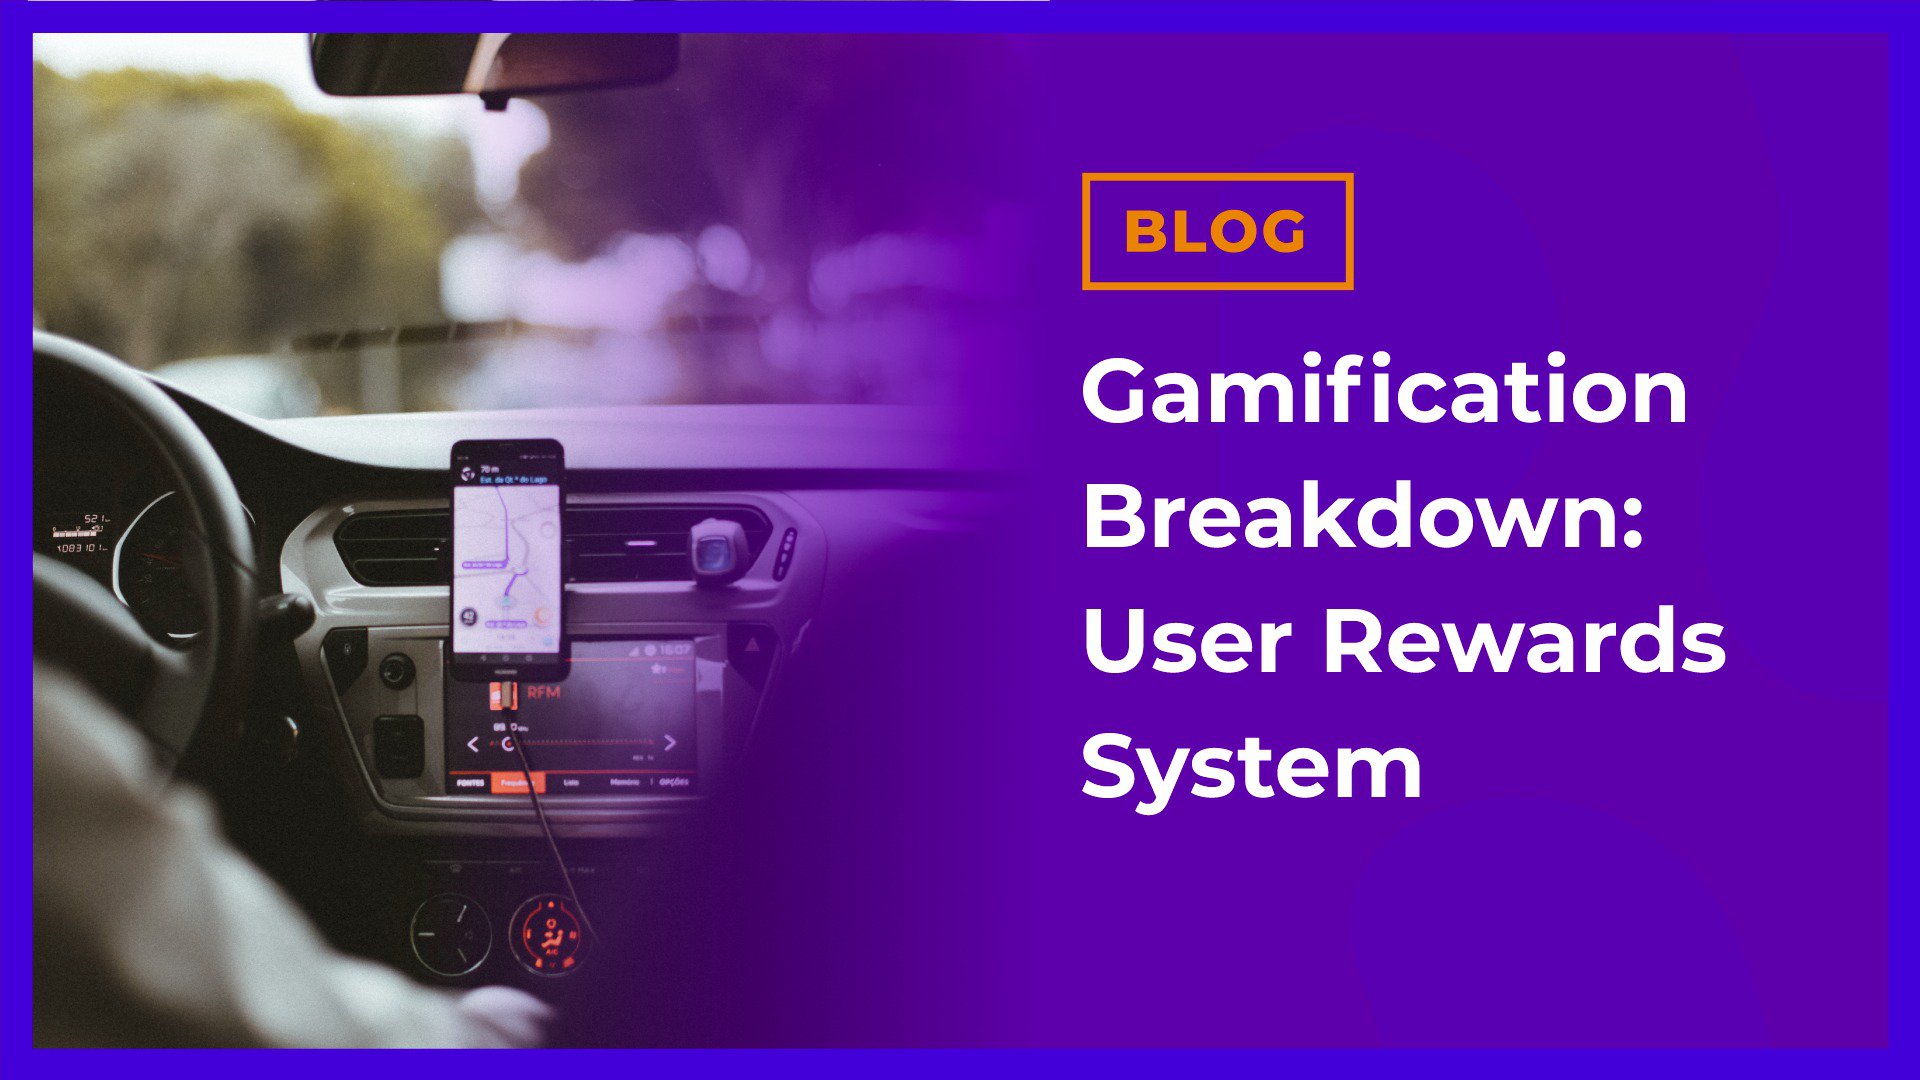 Uber: A great example of how to increase customer loyalty with gamification